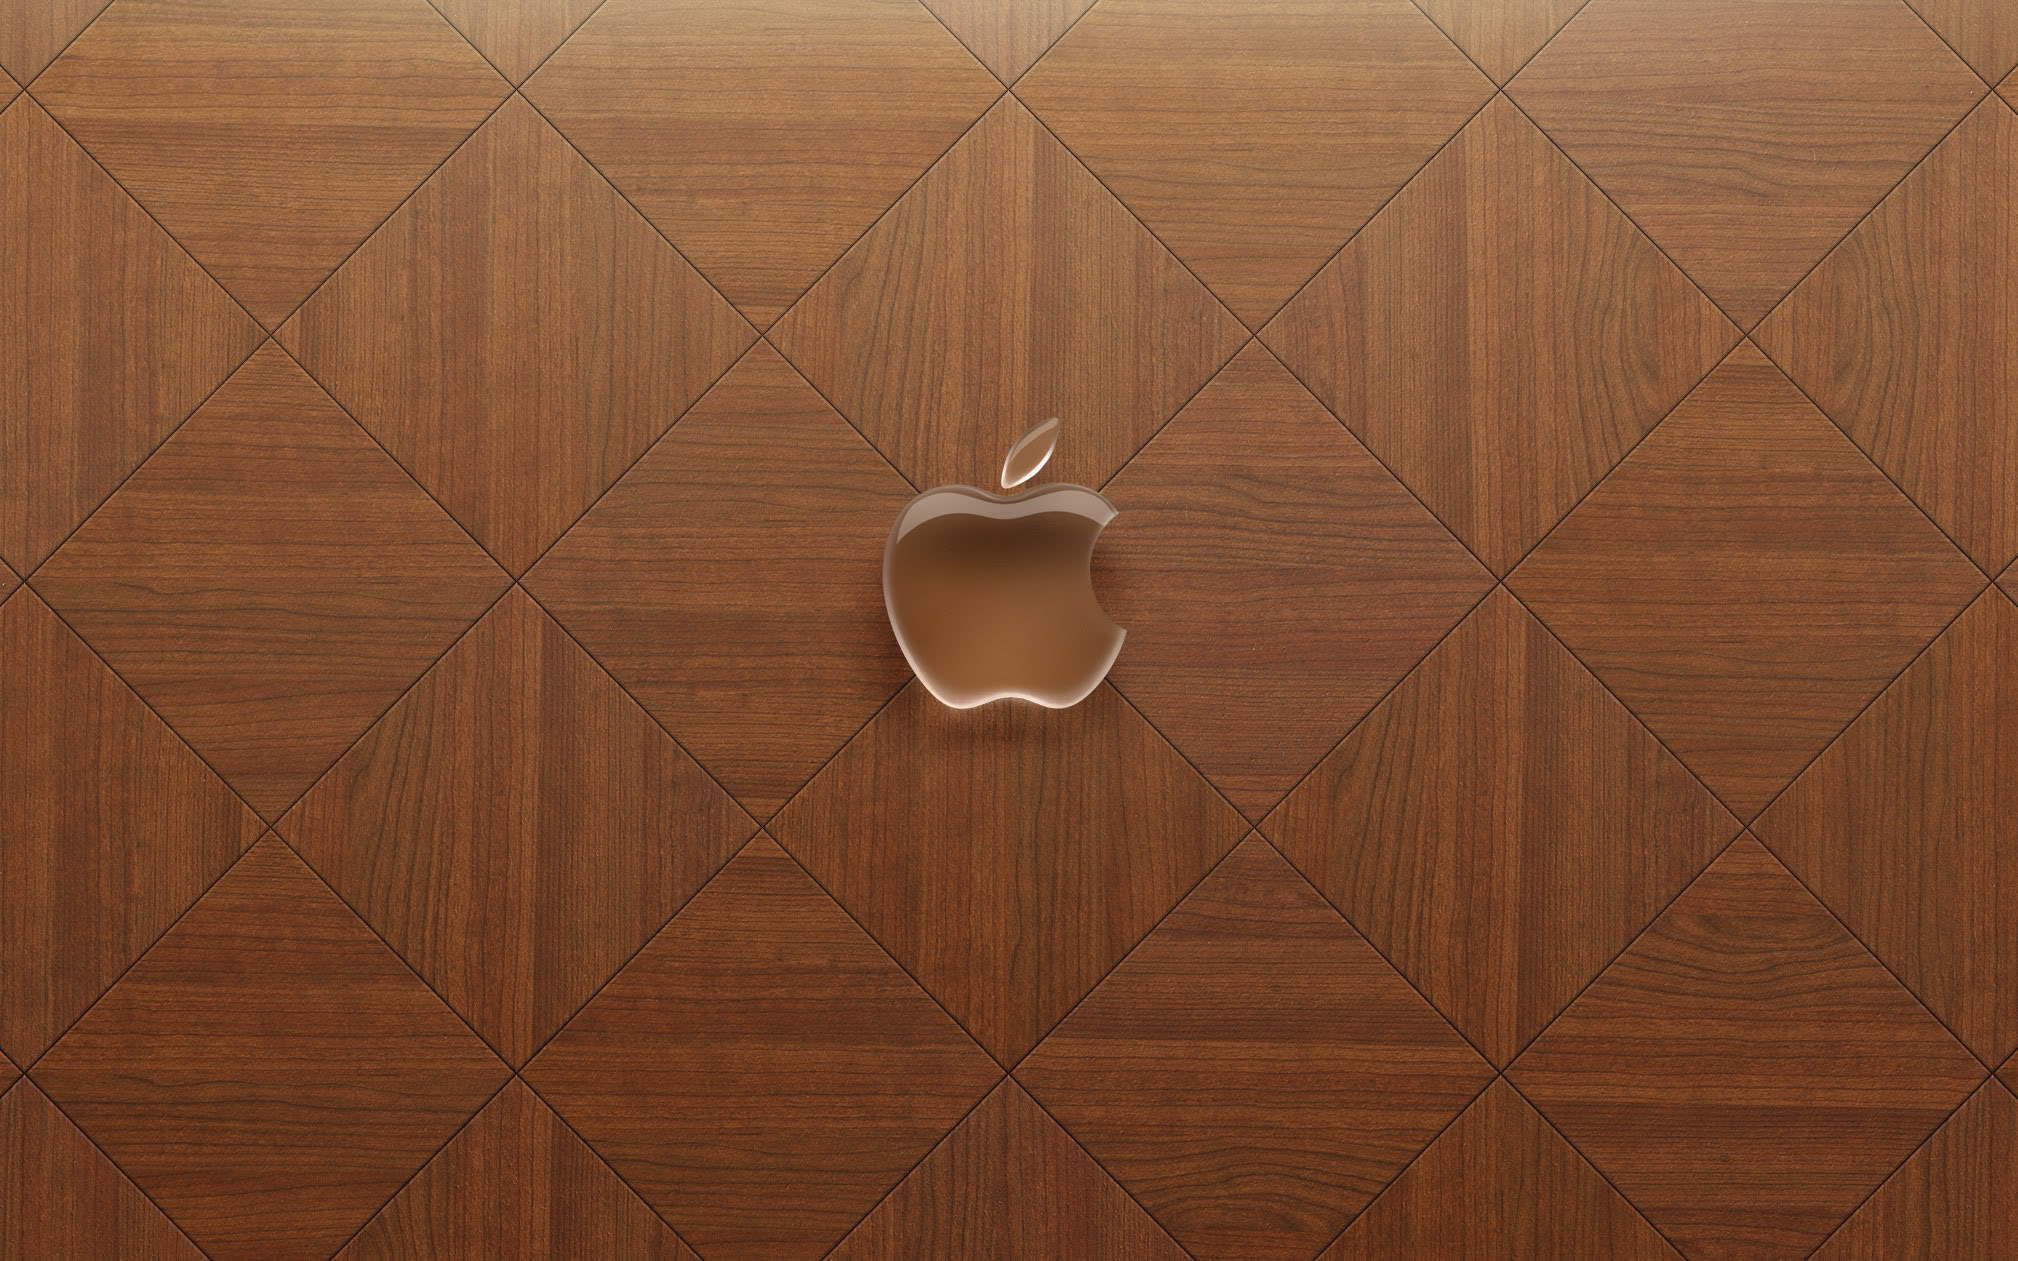 Collection of HD apple logo wallpaper on wood Computer World